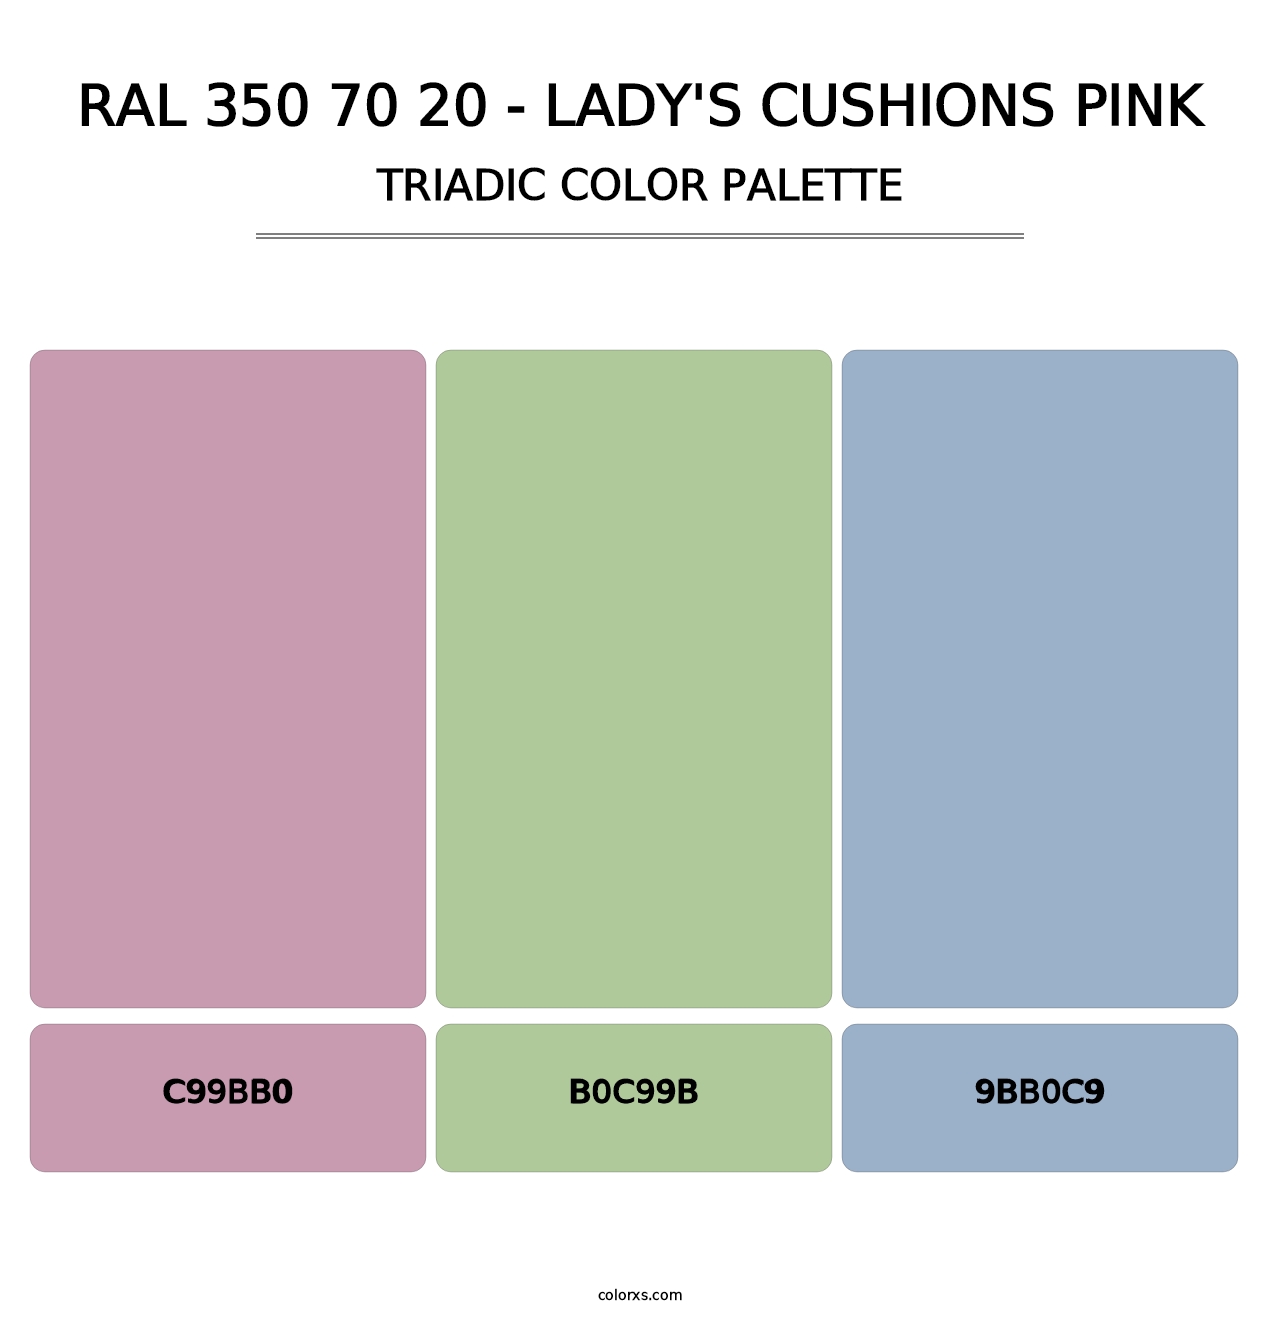 RAL 350 70 20 - Lady's Cushions Pink - Triadic Color Palette